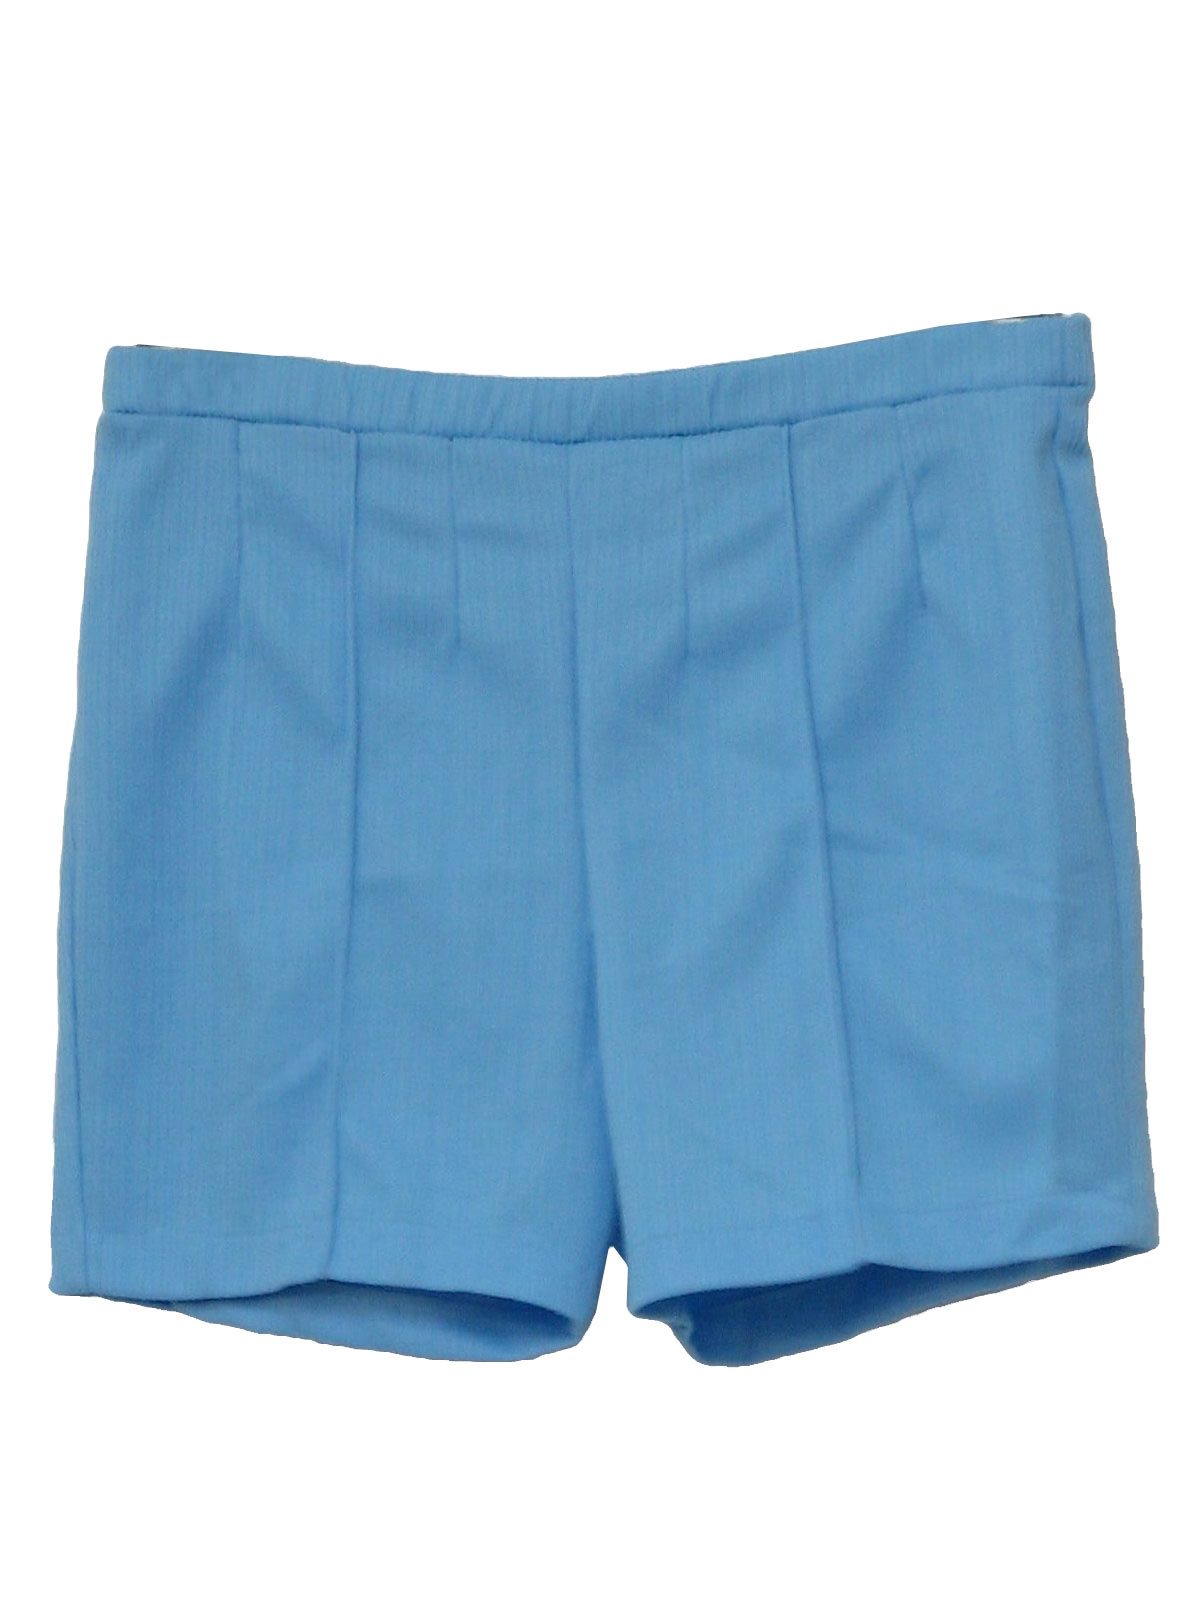 1970's Vintage Kmart Shorts: 70s -Kmart- Womens light blue textured  pinstripe style double knit polyester high waist shorts with darted rear  and piped down seam accenting.